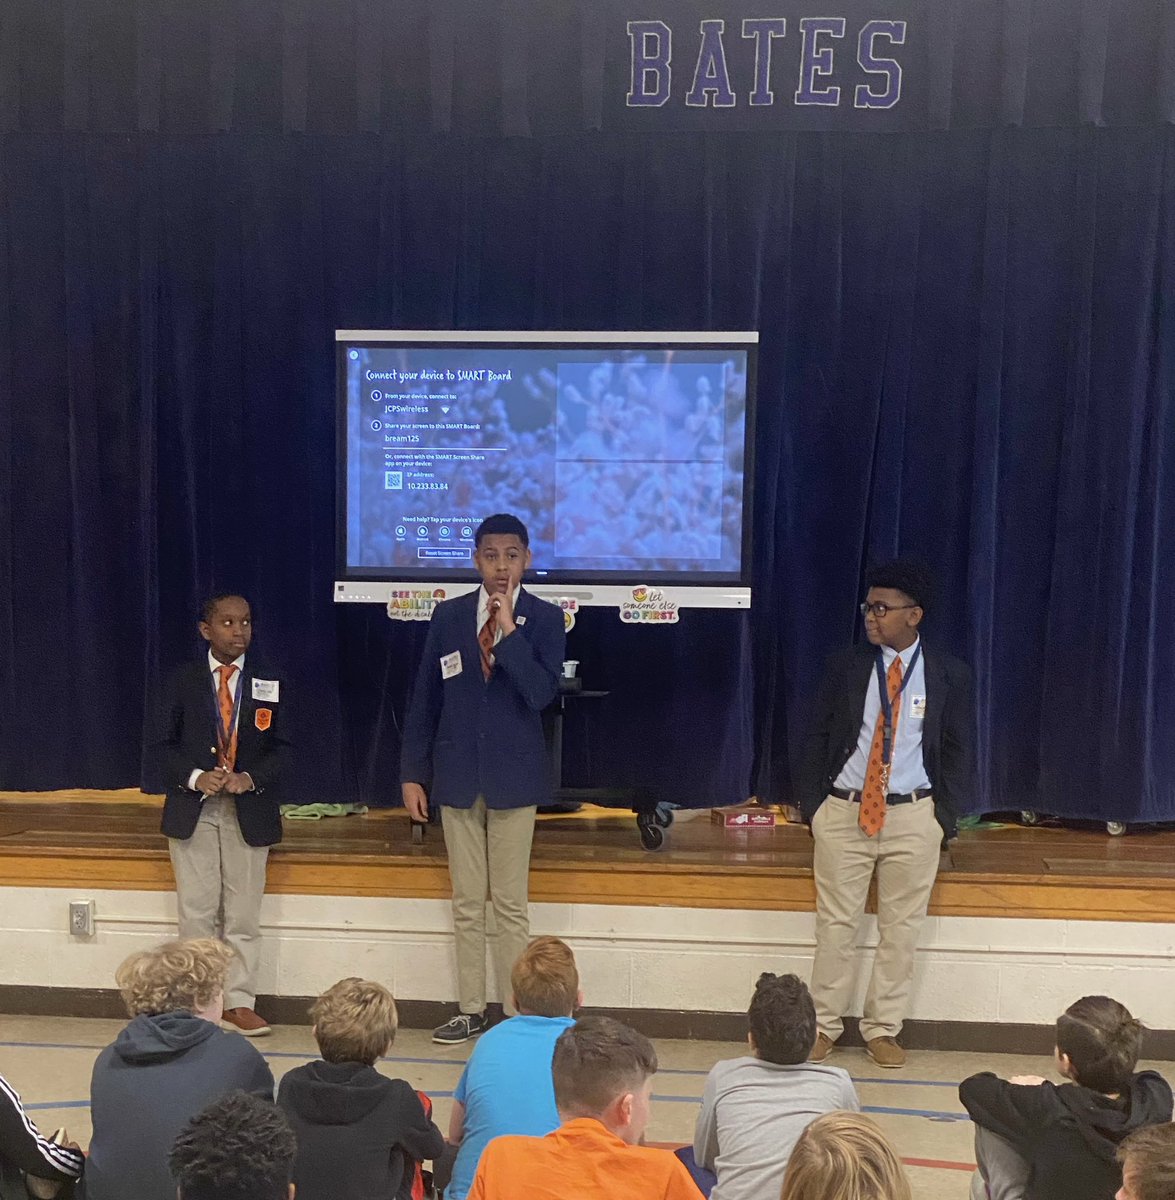 “Thinking About Transition Thursday!” Our 5th graders were able to hear about middle school magnet options @STEAM_GEMS and @WEBDuBOISJCPS . Special shout-out to former @BatesElemJCPS Gabby Dalcourt who spoke about her experience @STEAM_GEMS @BatesElemPrinc @BatesCounselors